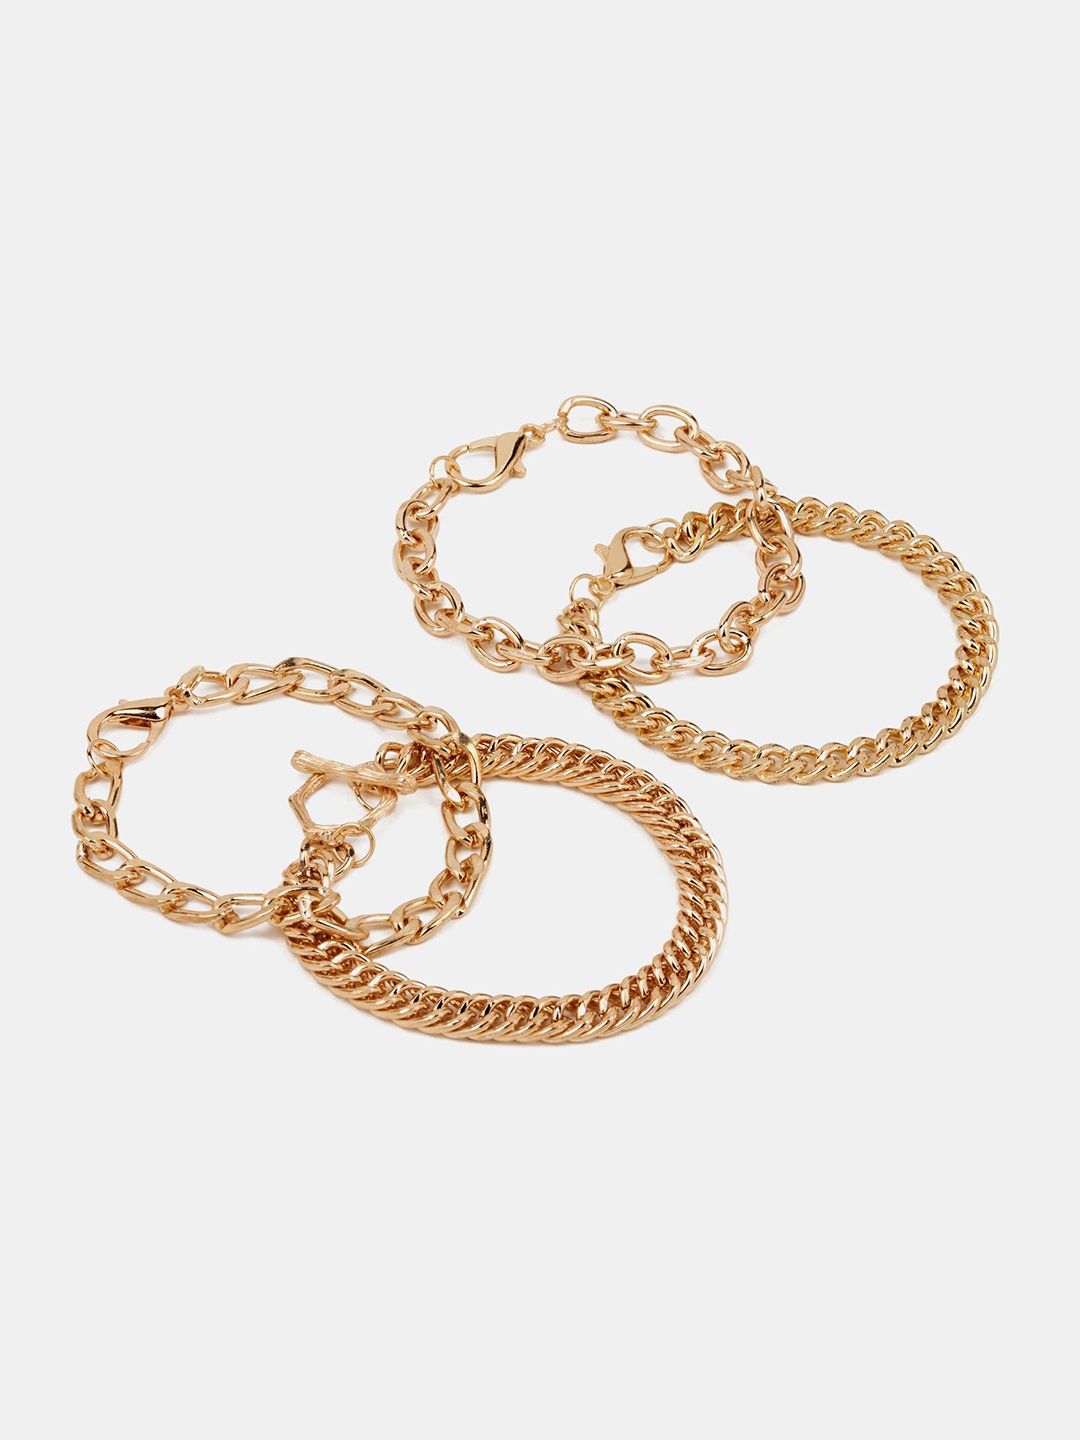 20Dresses Women Set of 4 Gold-Toned Link Bracelets Price in India